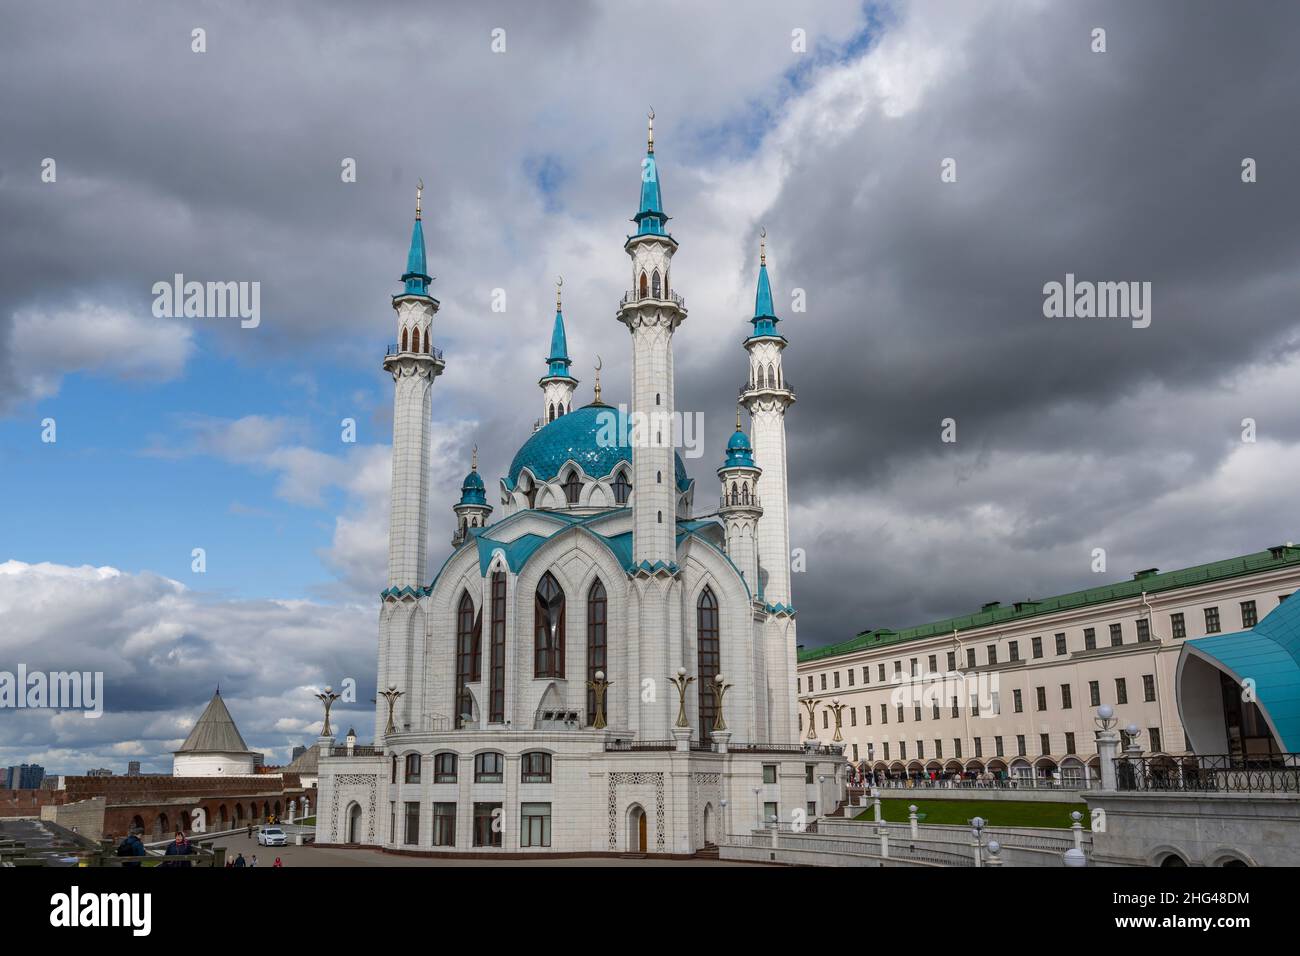 Kazan, Russia - September 21, 2019: Exterior white and blue Kul Sharif Mosque with dark clouds in the background of the Tartastan, Russia. Stock Photo